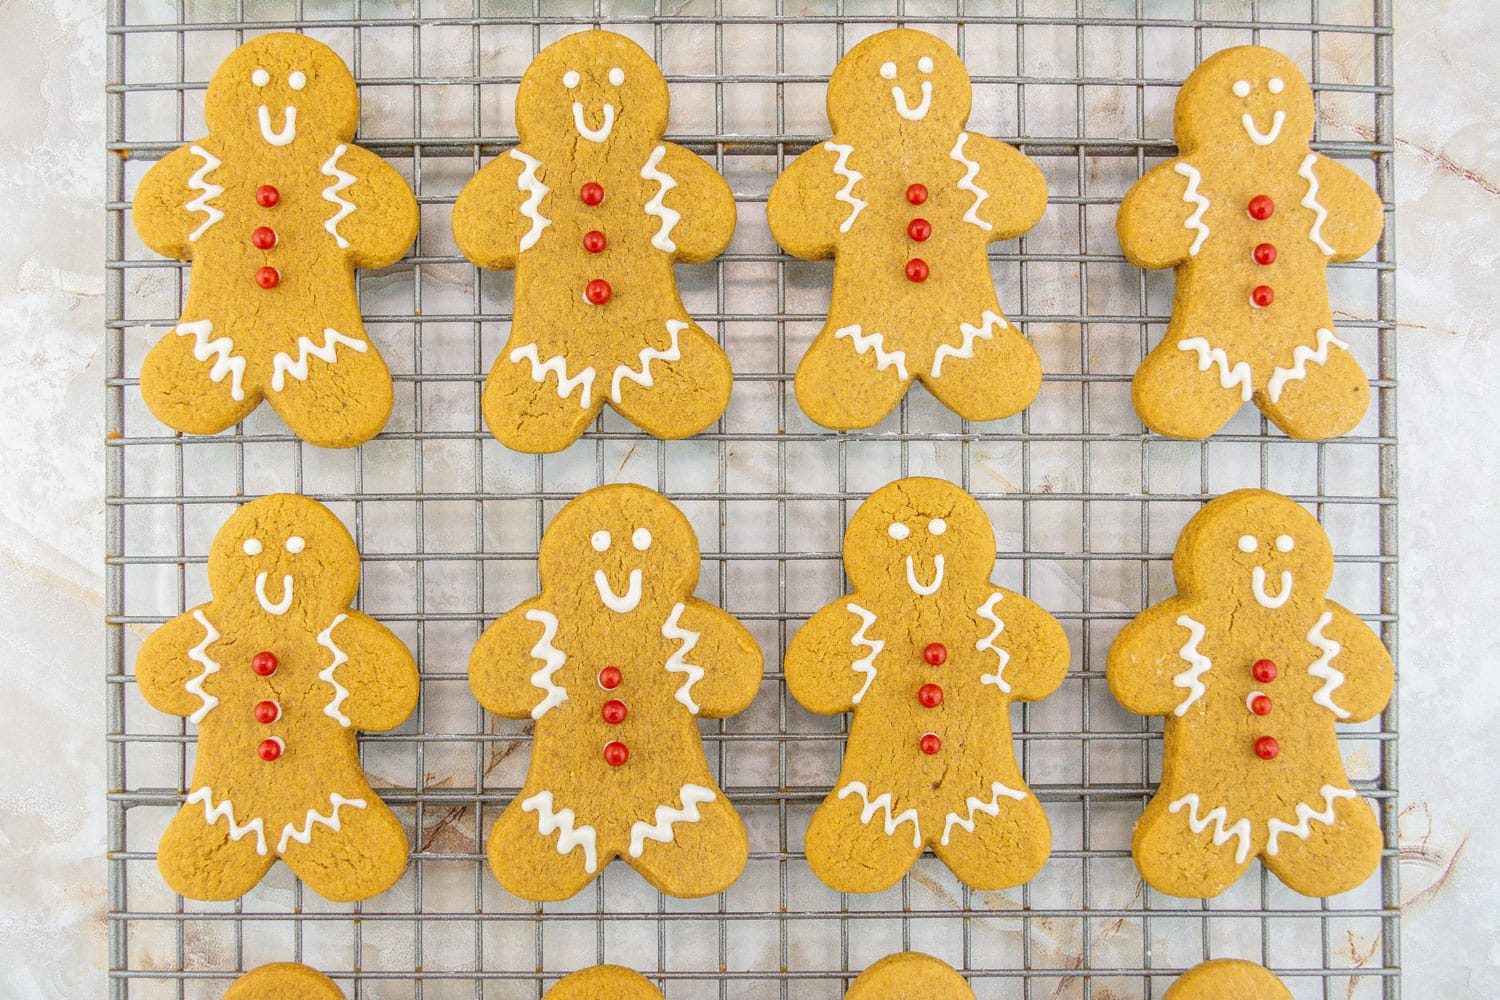 Iced gingerbread men cookies on a wire rack